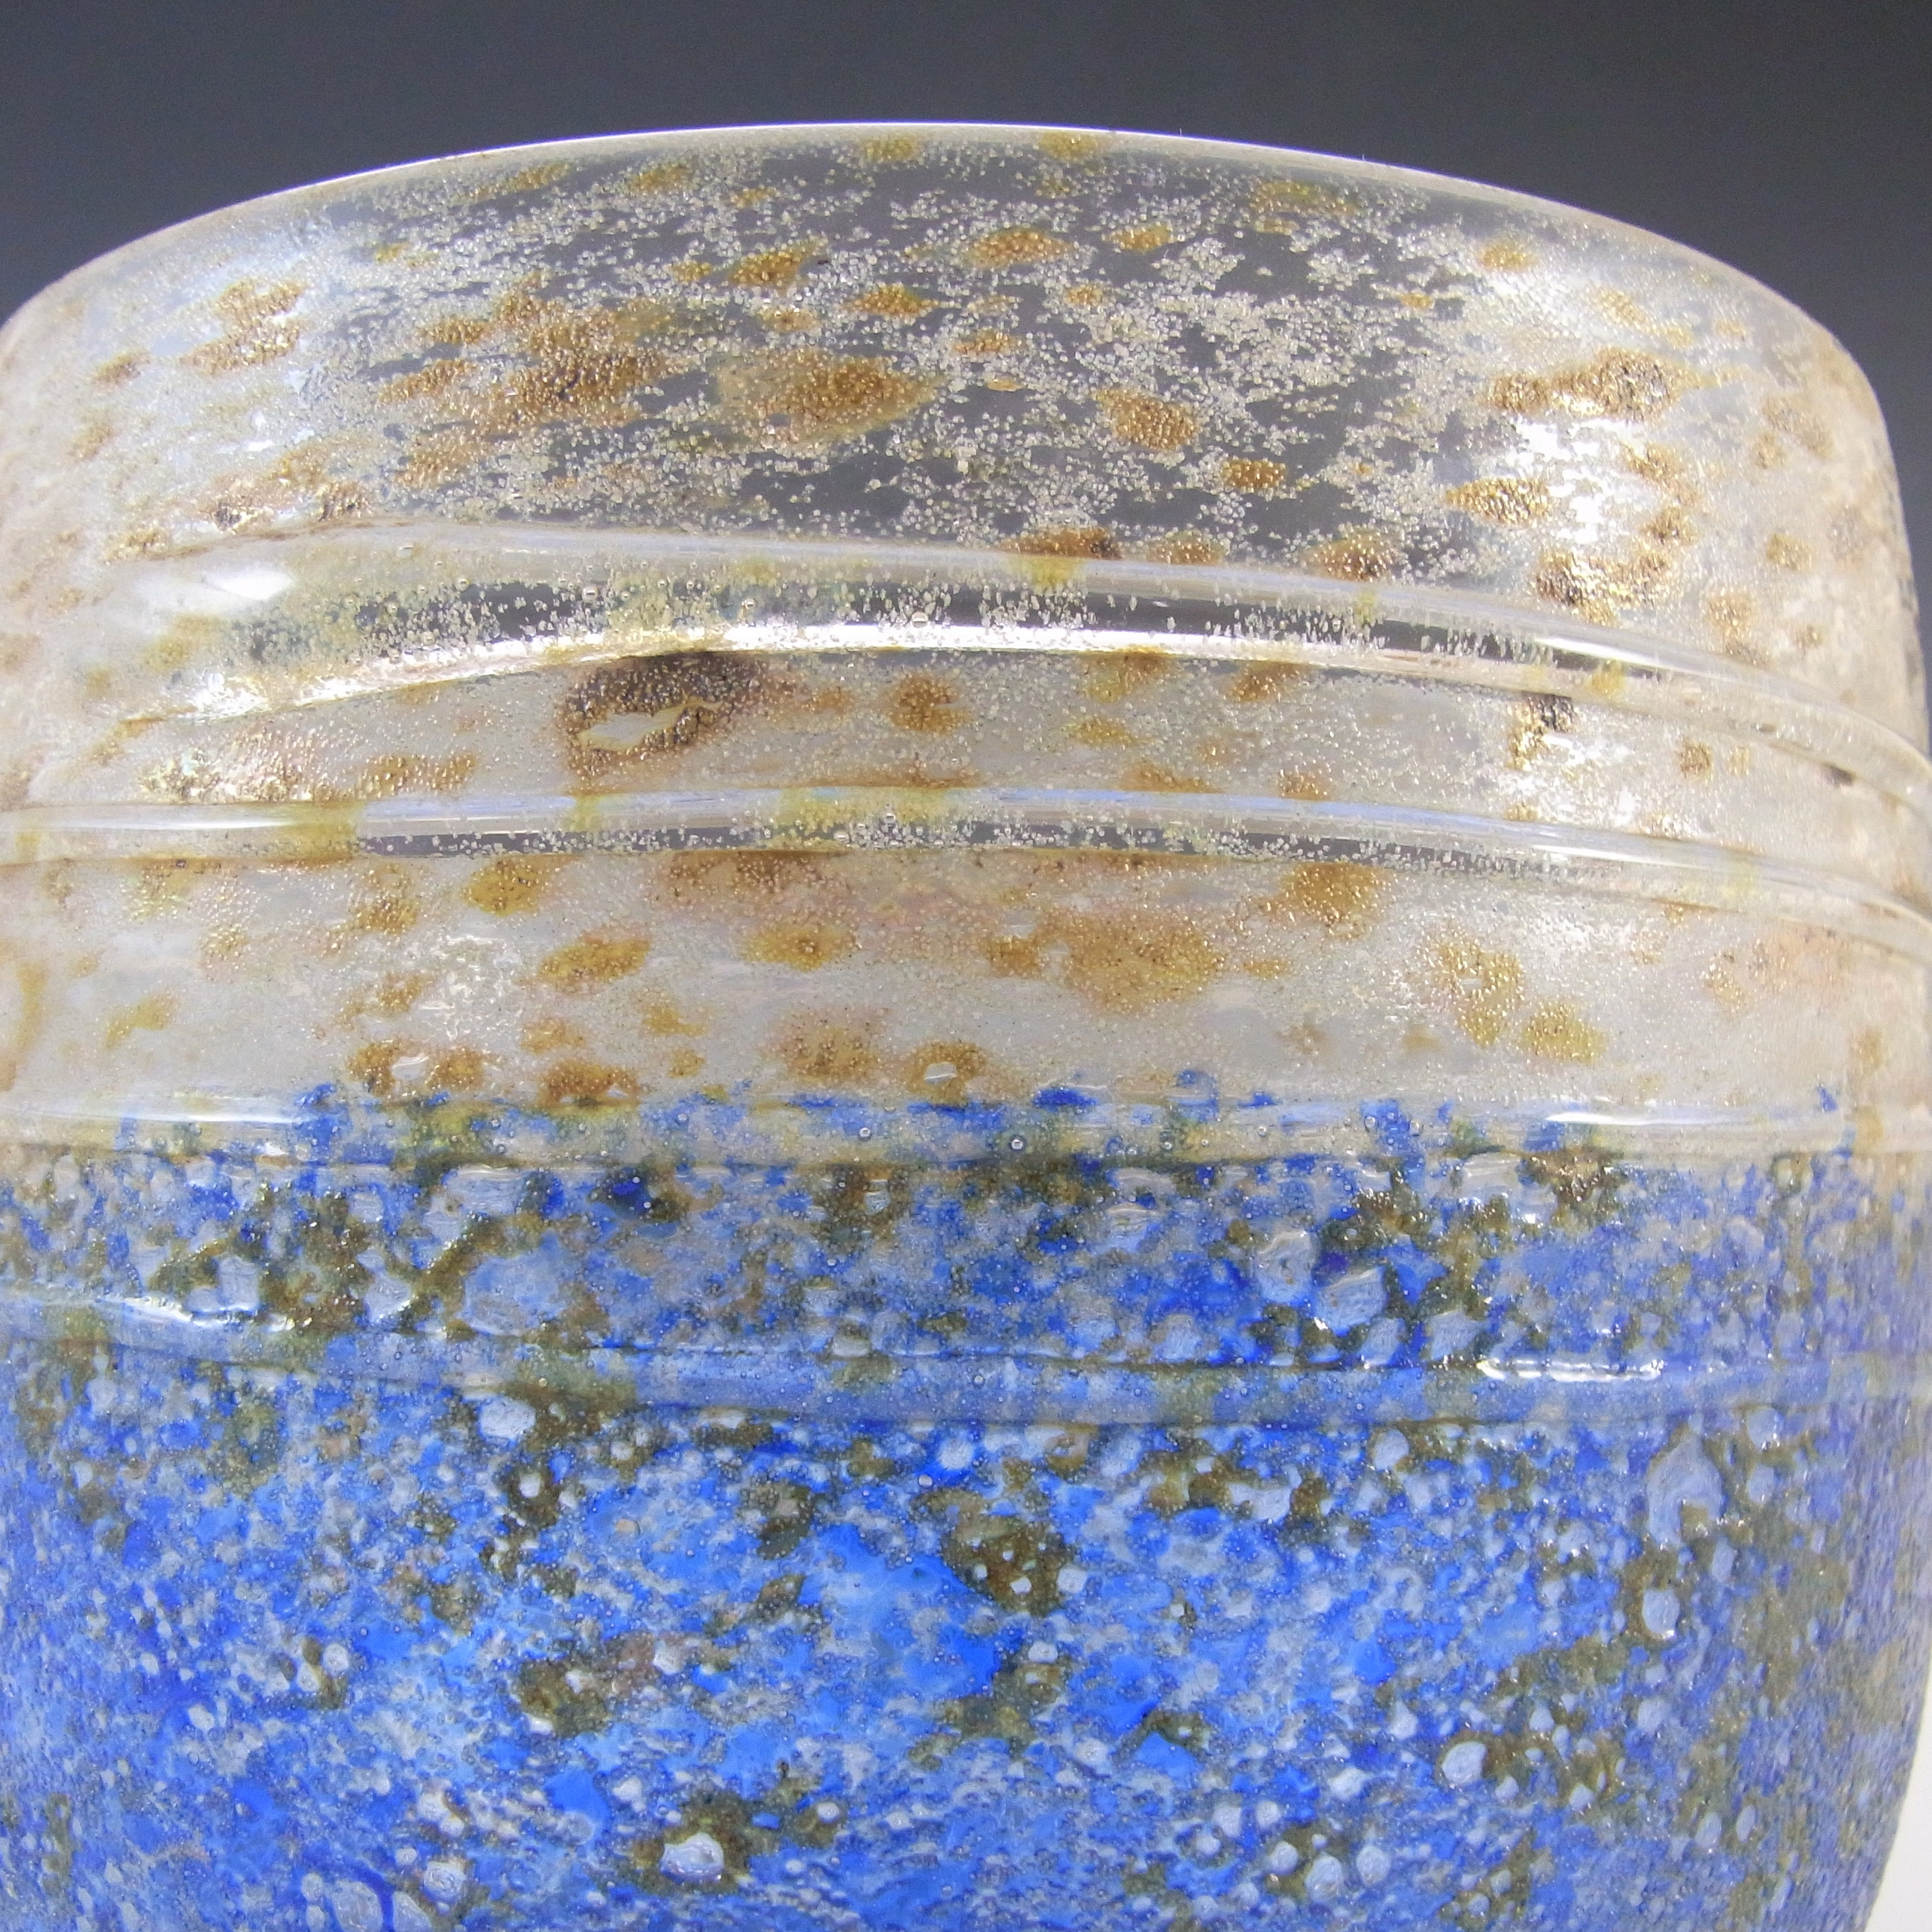 SIGNED Gusum Blue & Brown Swedish Glass Vase by Milan Vobruba - Click Image to Close